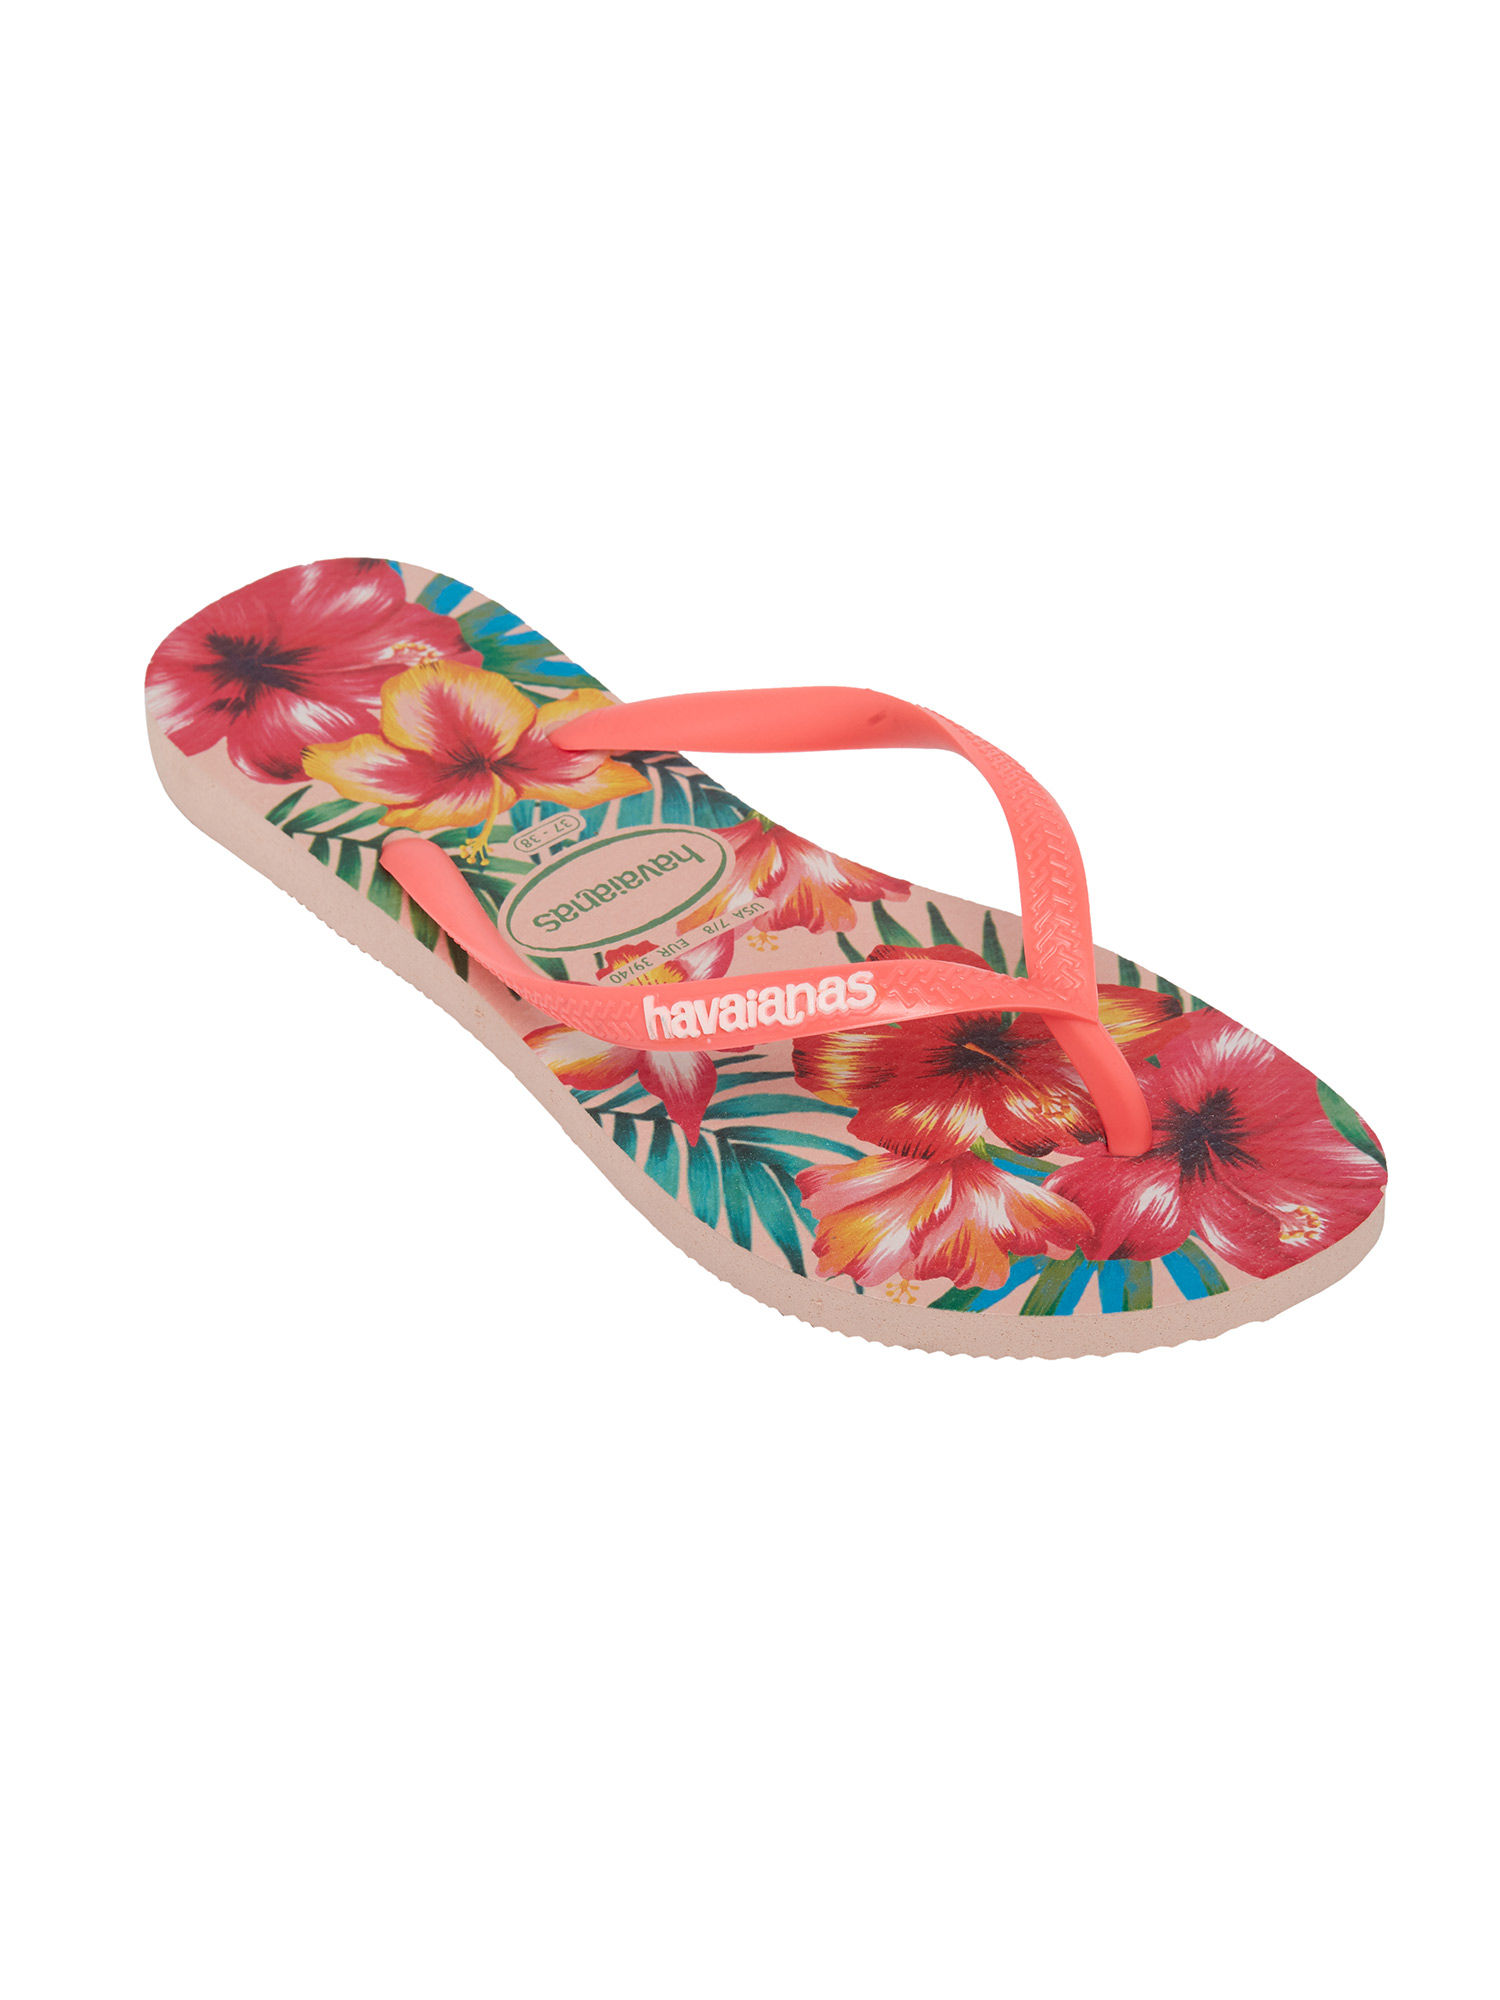 Havaianas Travel Luggage | Red/Pink